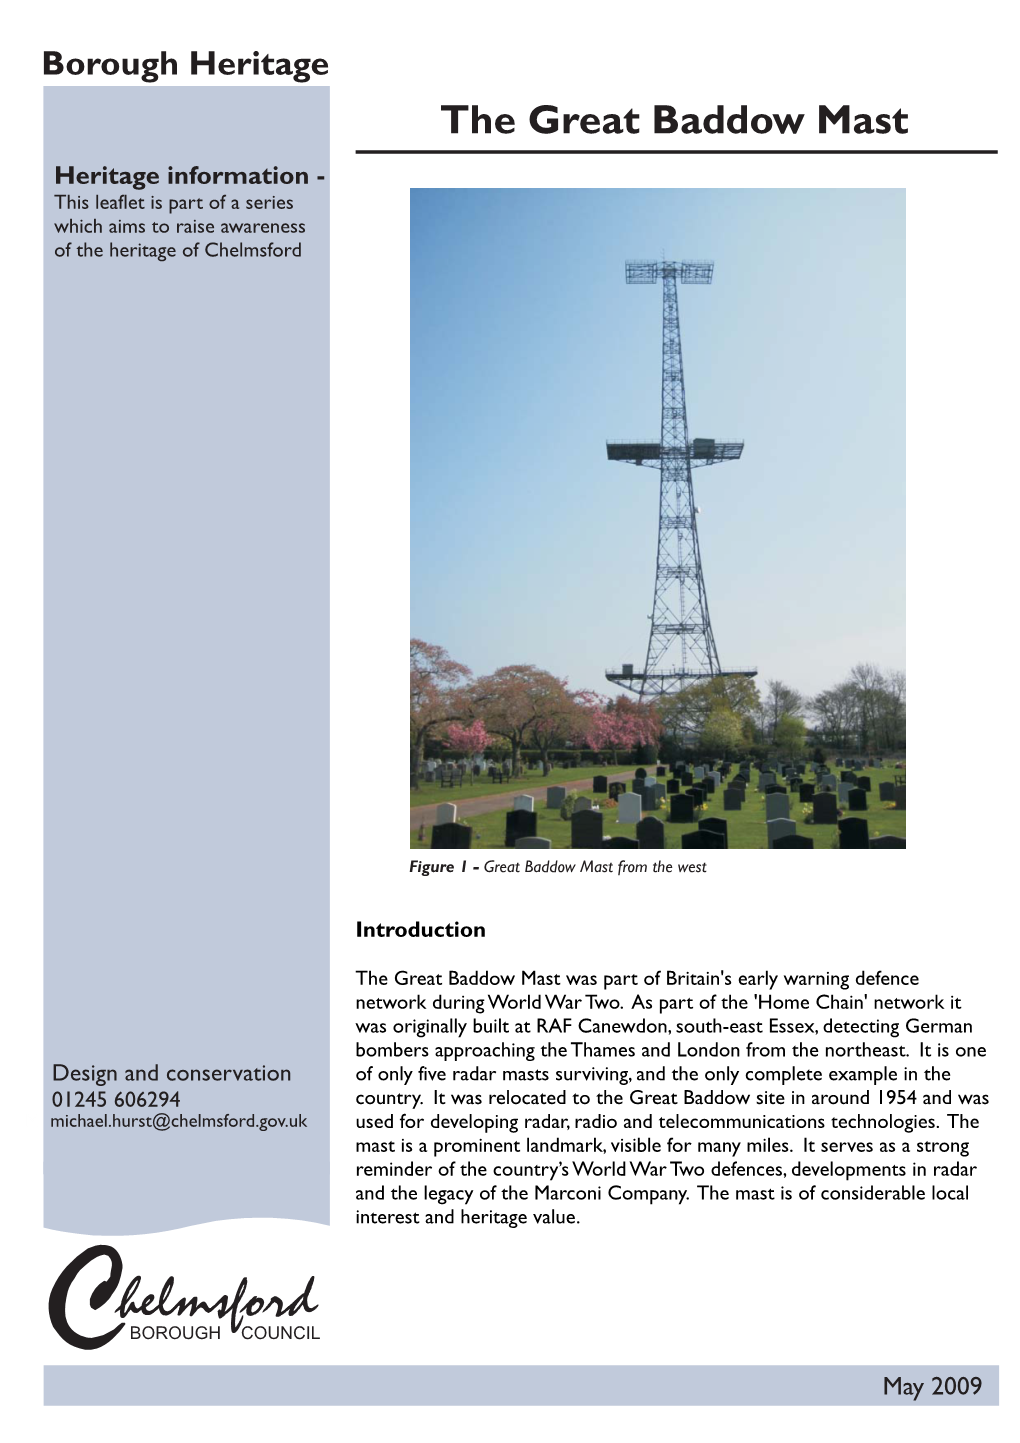 The Great Baddow Mast Heritage Information - This Leaflet Is Part of a Series Which Aims to Raise Awareness of the Heritage of Chelmsford